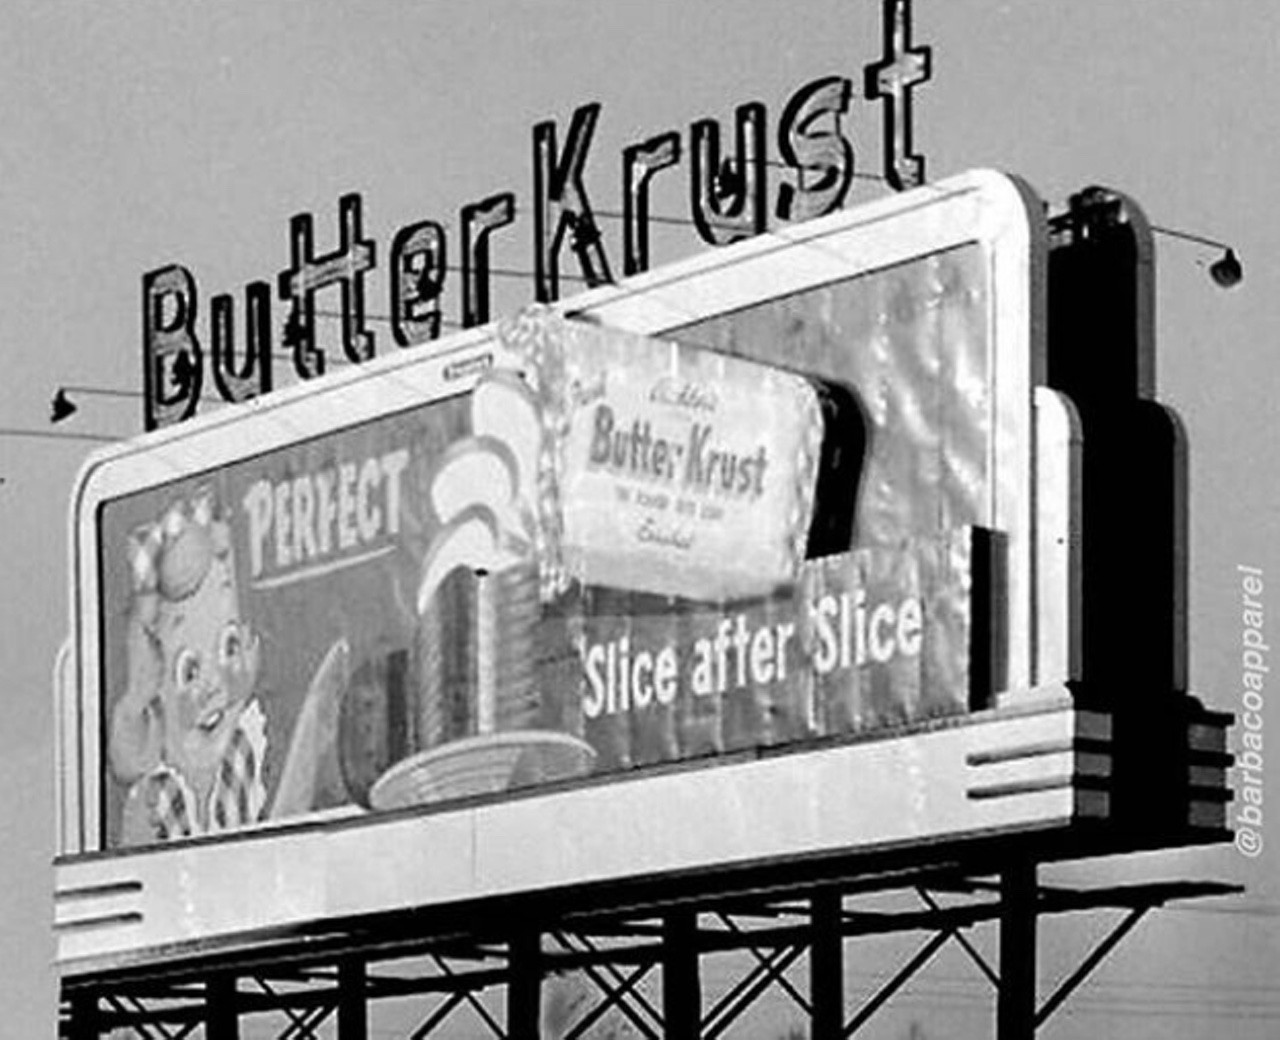 Butter Krust's moving billboard
The “Falling Slices” billboard on San Pedro Avenue just north of Hildebrand featured a rotating wheel that made it appear slices were tumbling from a loaf of Butter Krust bread. The Butter Krust ad came down in 1998, and the mechanical portion of the sign was removed roughly 10 years later.
Photo via Instagram / barbacoapparel